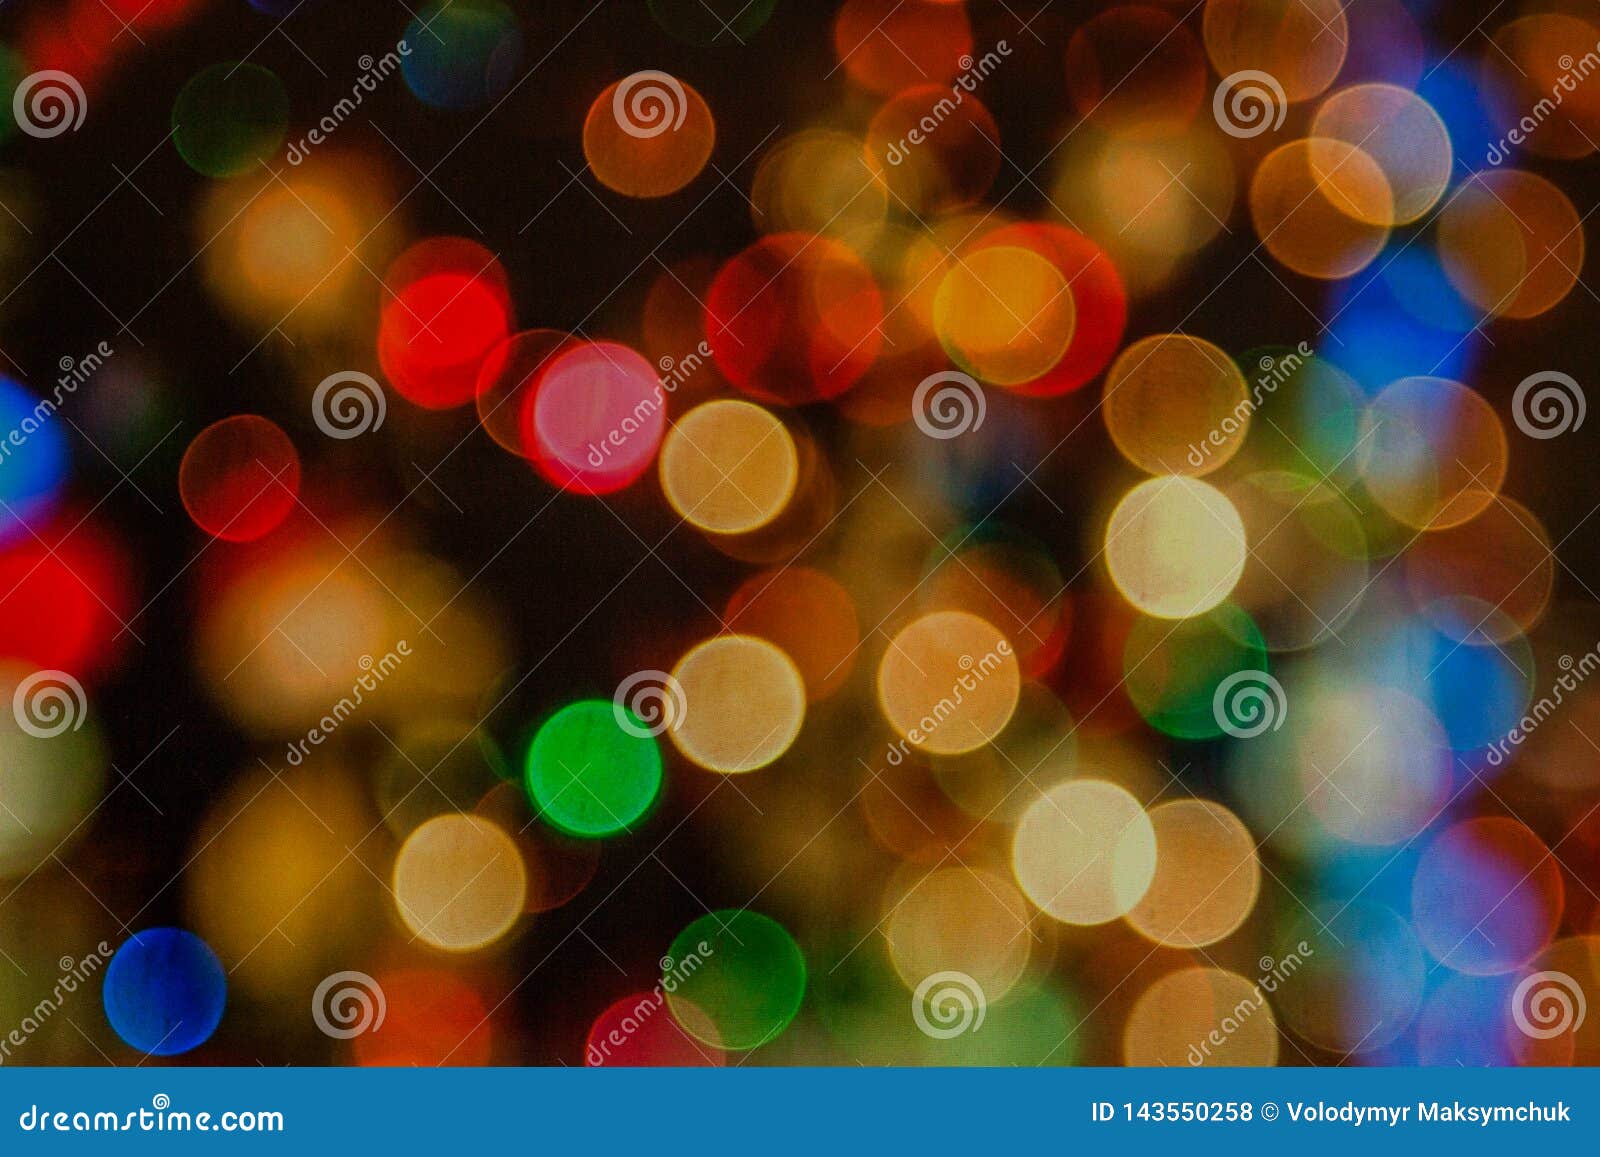 Candle Light Boke Blur For Background, Candle Light Boke Blur For ...